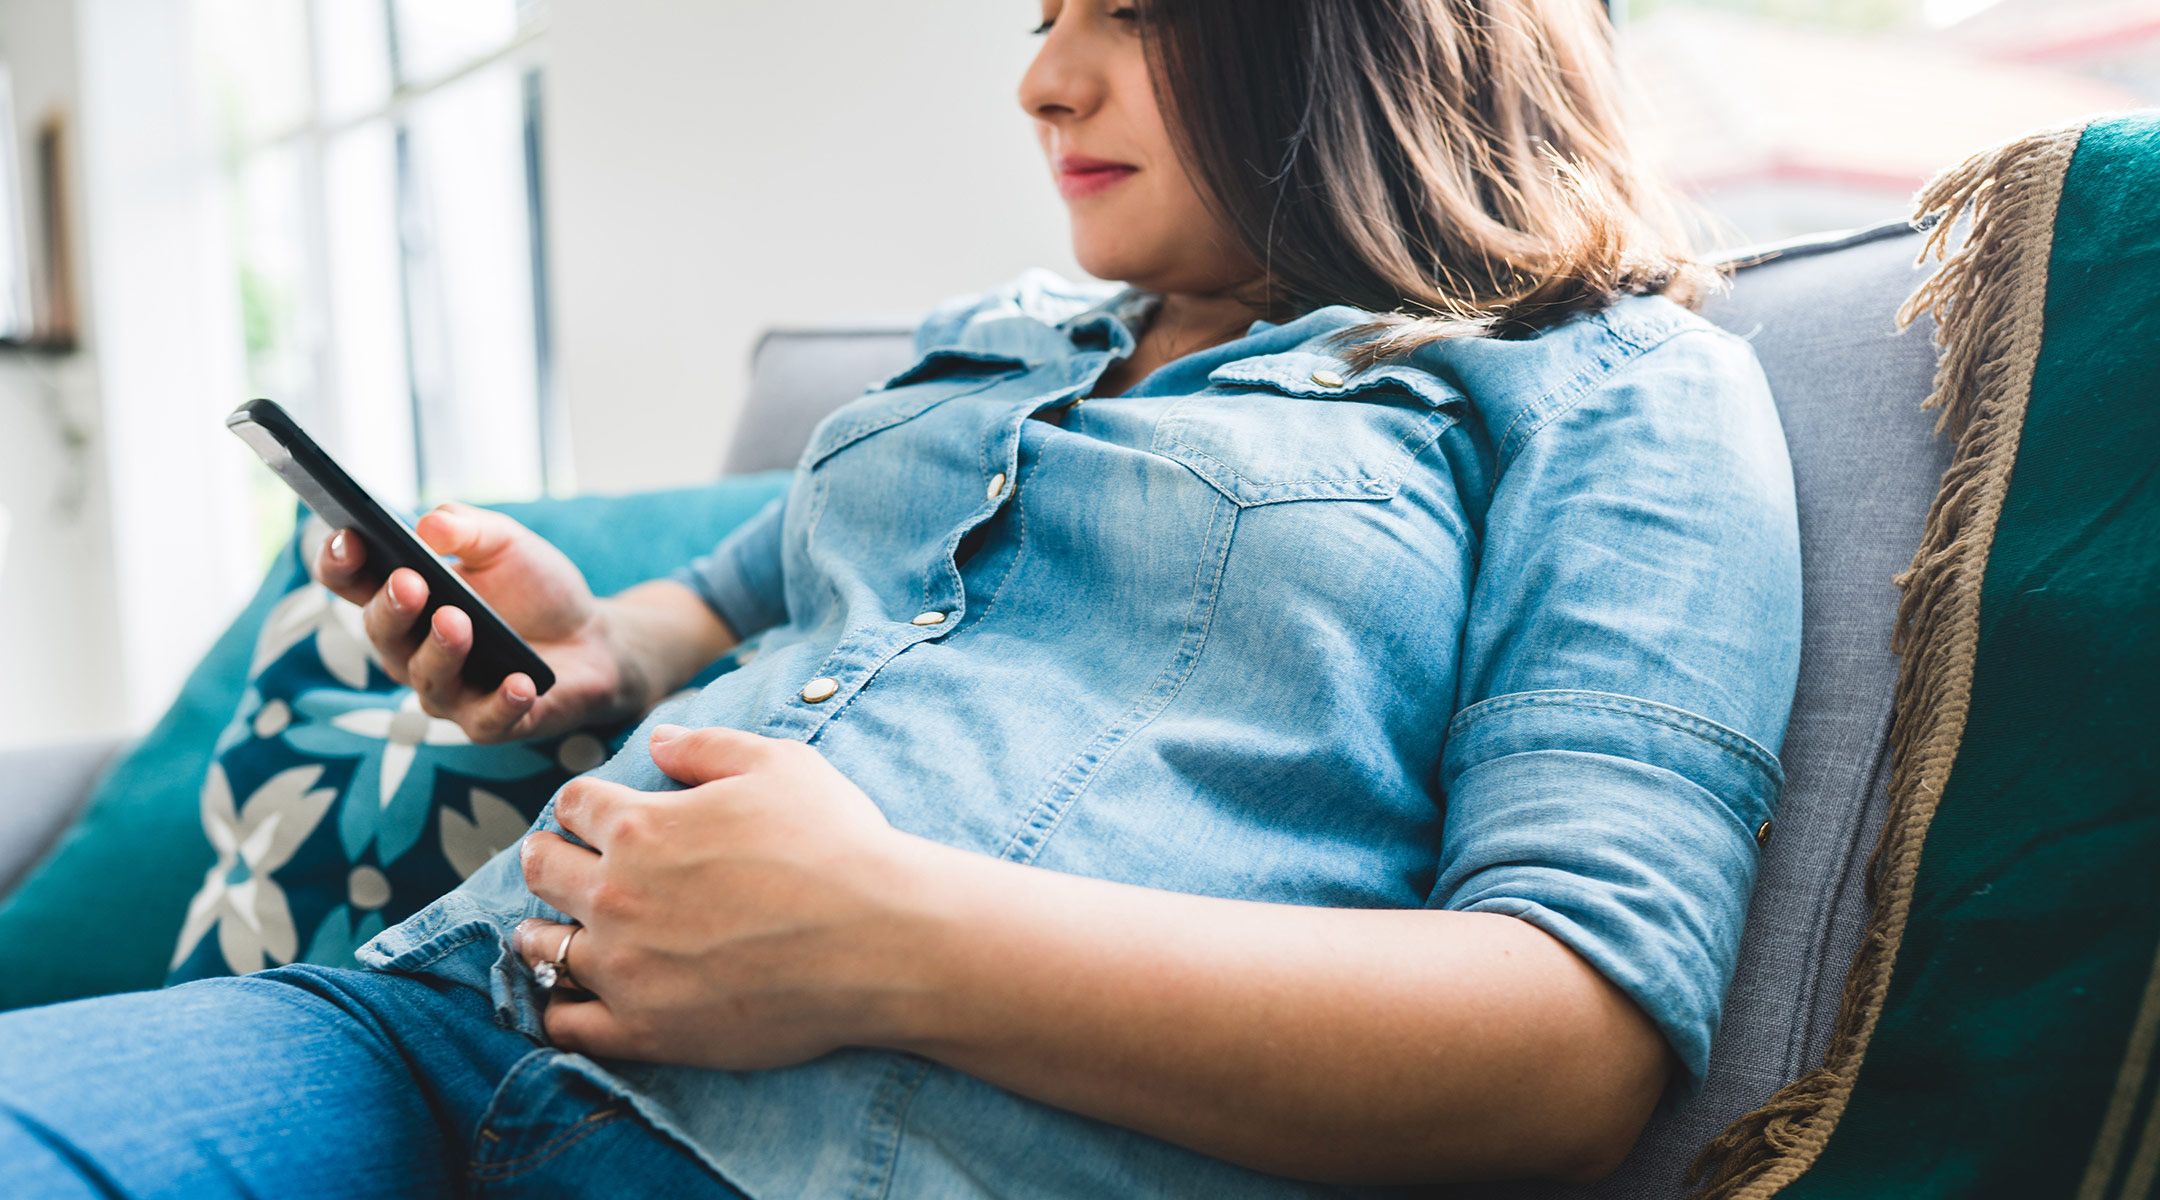 pregnant woman sits on the couch and looks at phone